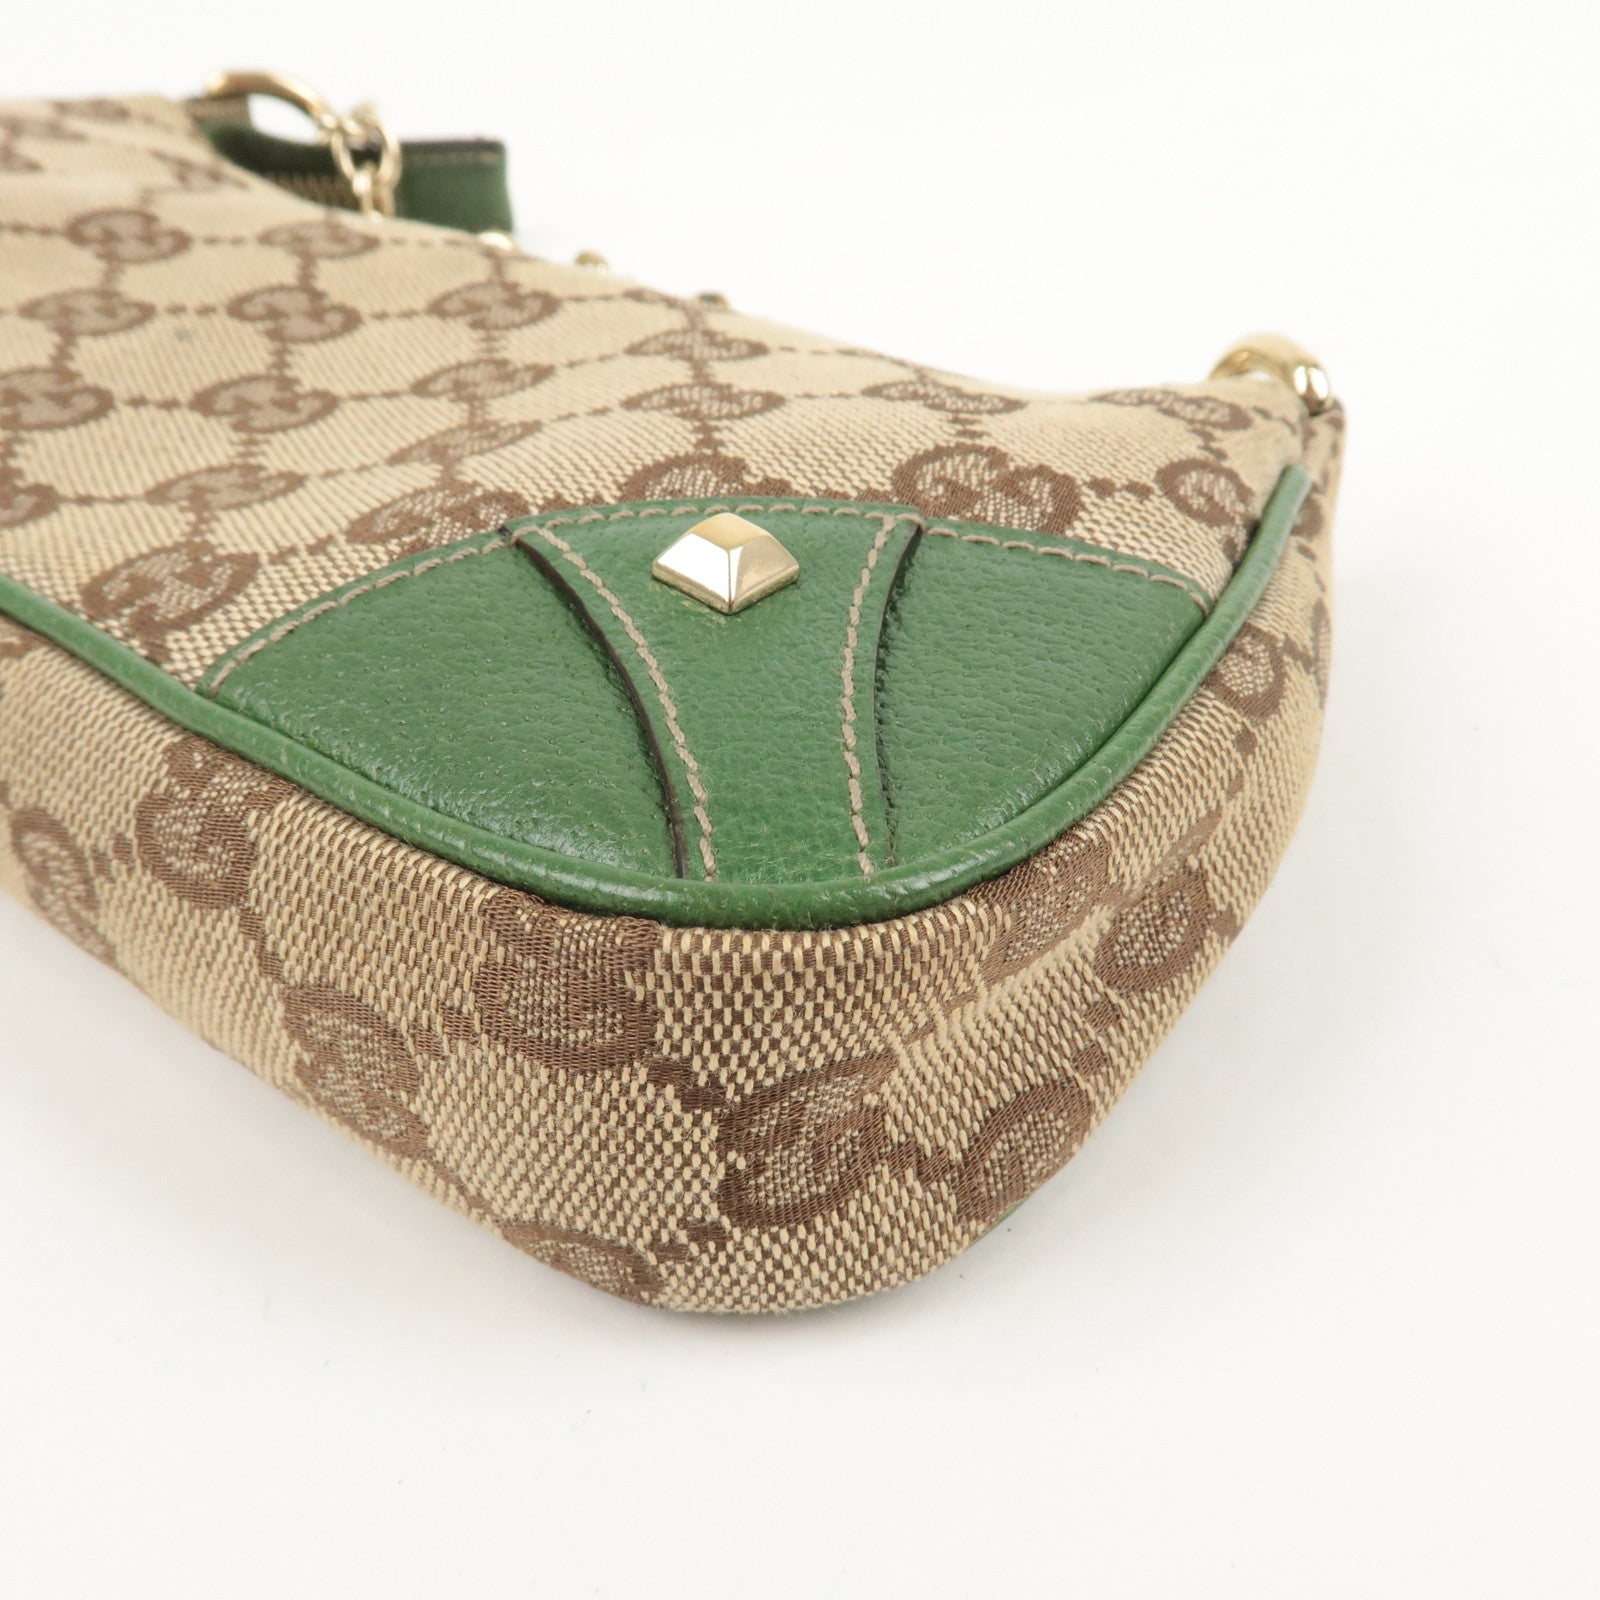 GUCCI-GG-Canvas-Leather-Chain-Shoulder-Bag-Beige-Green-120940 